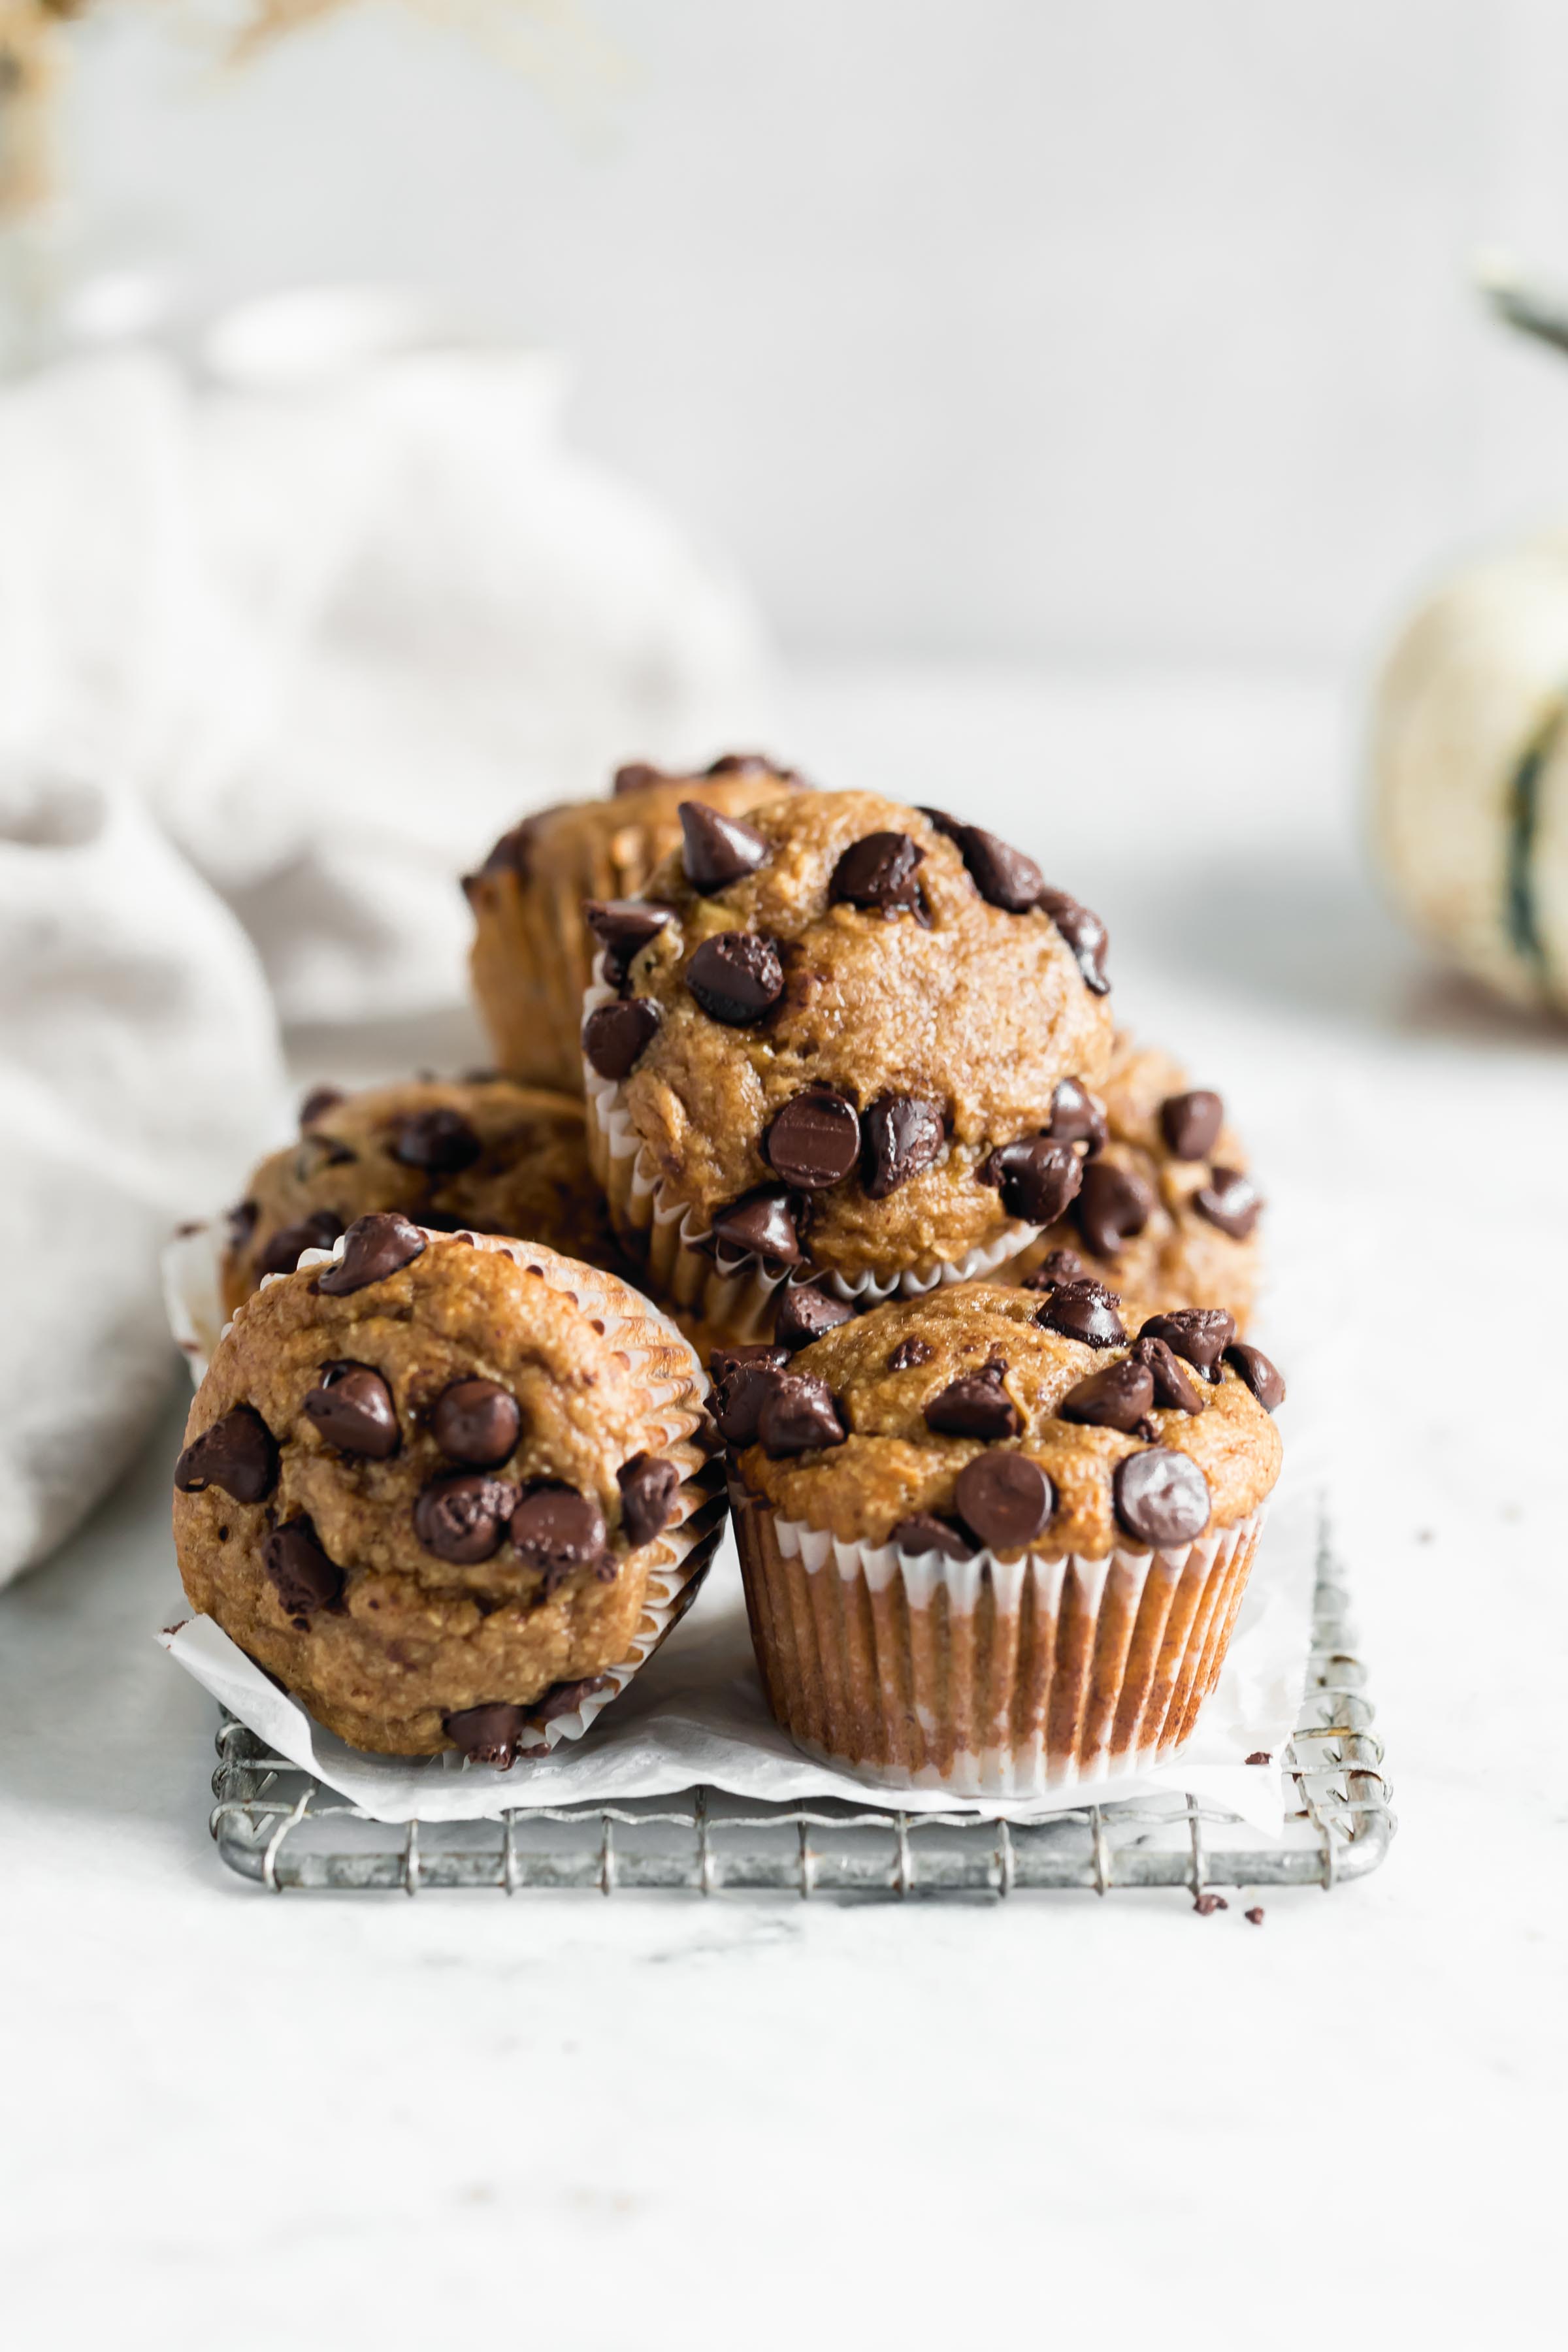 Healthy peanut butter banana muffins with chocolate chips are our new favorite healthier breakfast. And they're about to be yours too :)